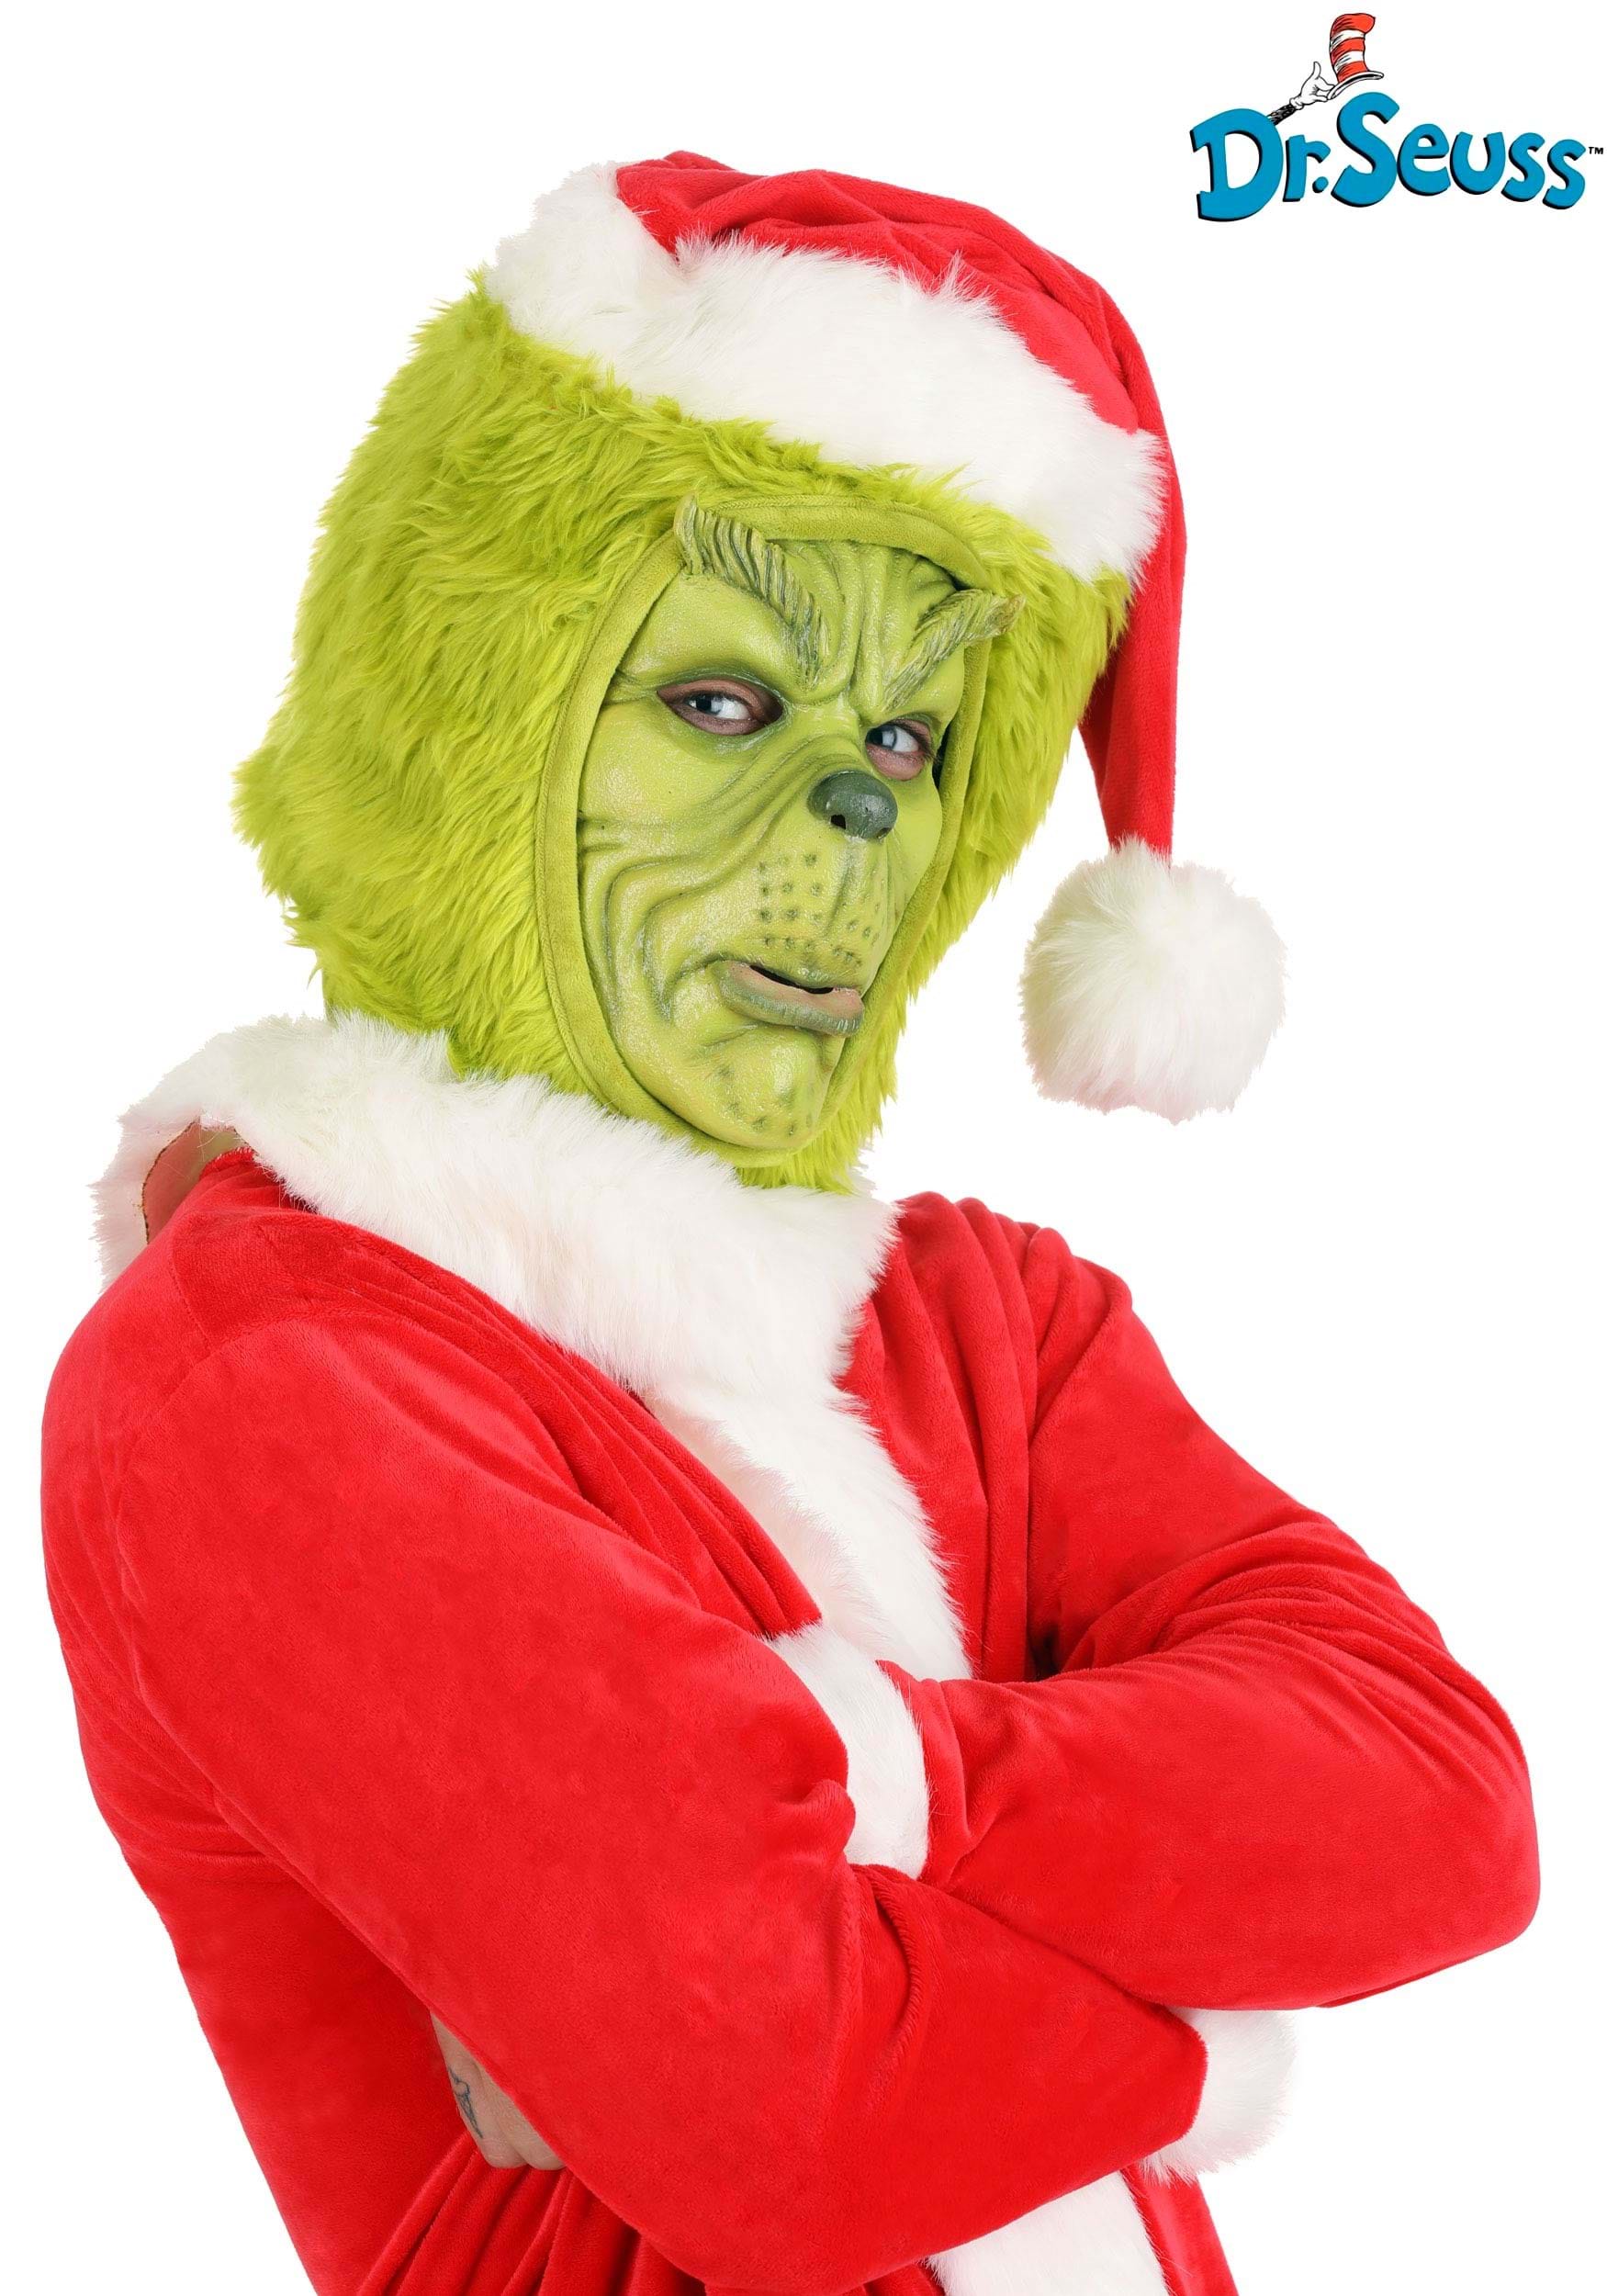 https://images.halloweencostumes.com/products/87133/1-1/adult-grinch-mask-.jpg